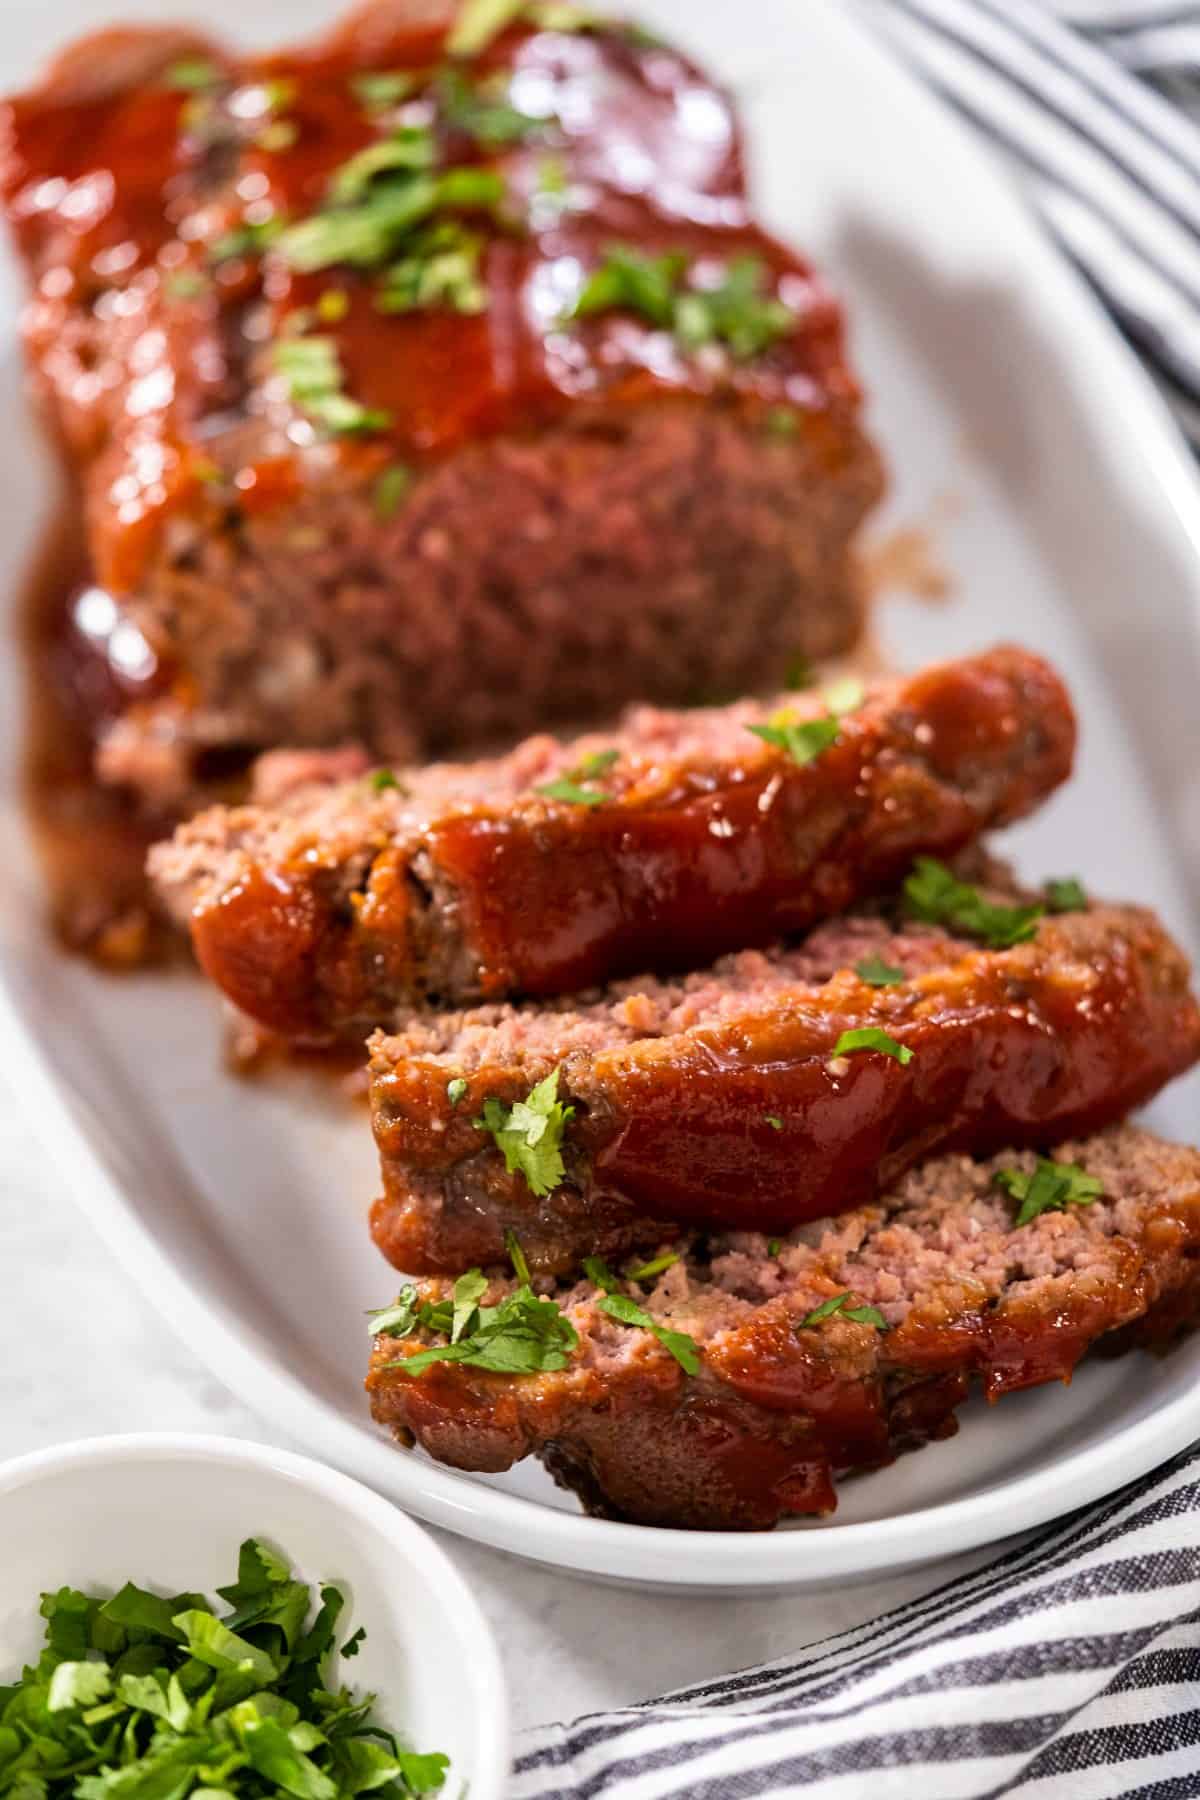 paul prudhomme meatloaf with a glaze garnished with parsley and served on a platter